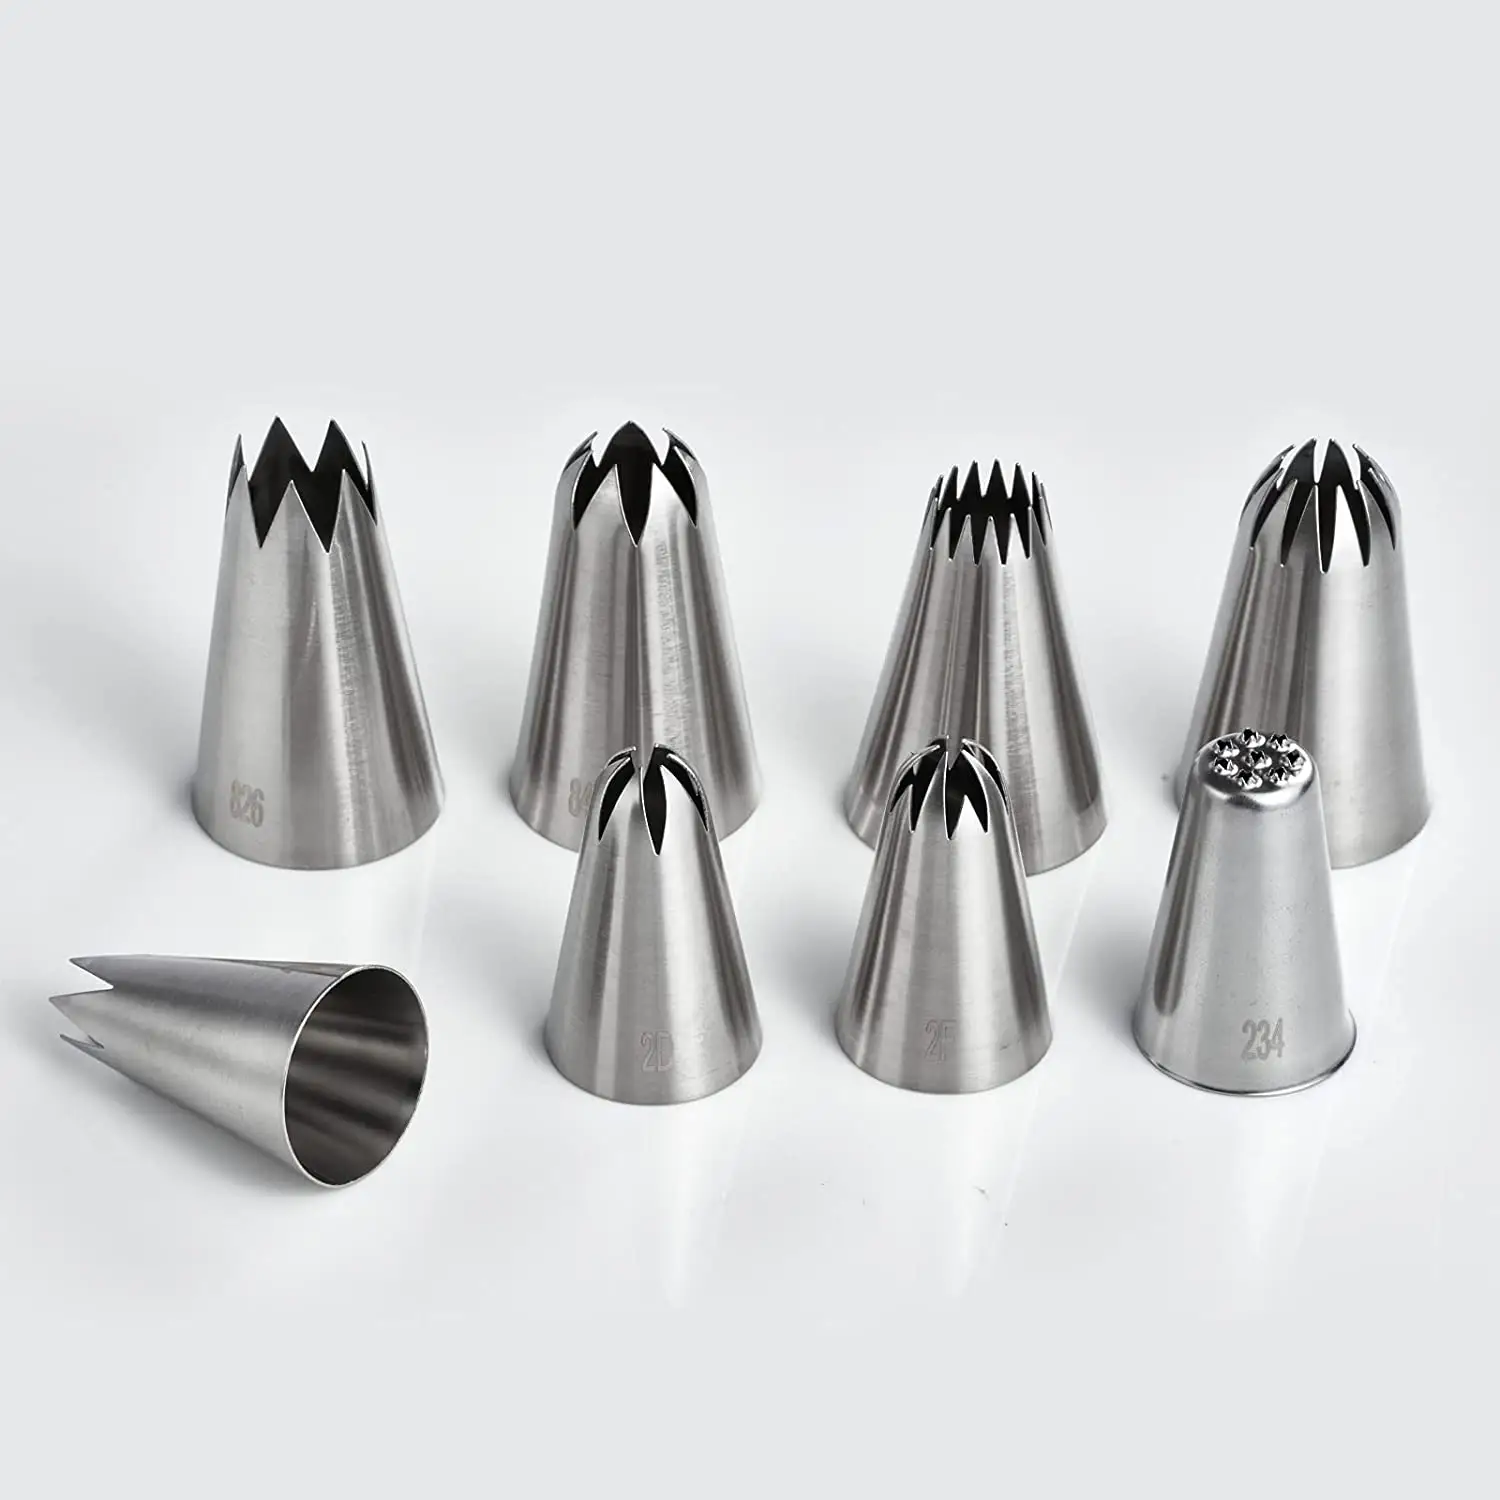 Russian Cake Decorating Nozzle Piping Pastry Tool Baking Tip Tools Leaf Shape Icing Stainless Steel Nozzles Set